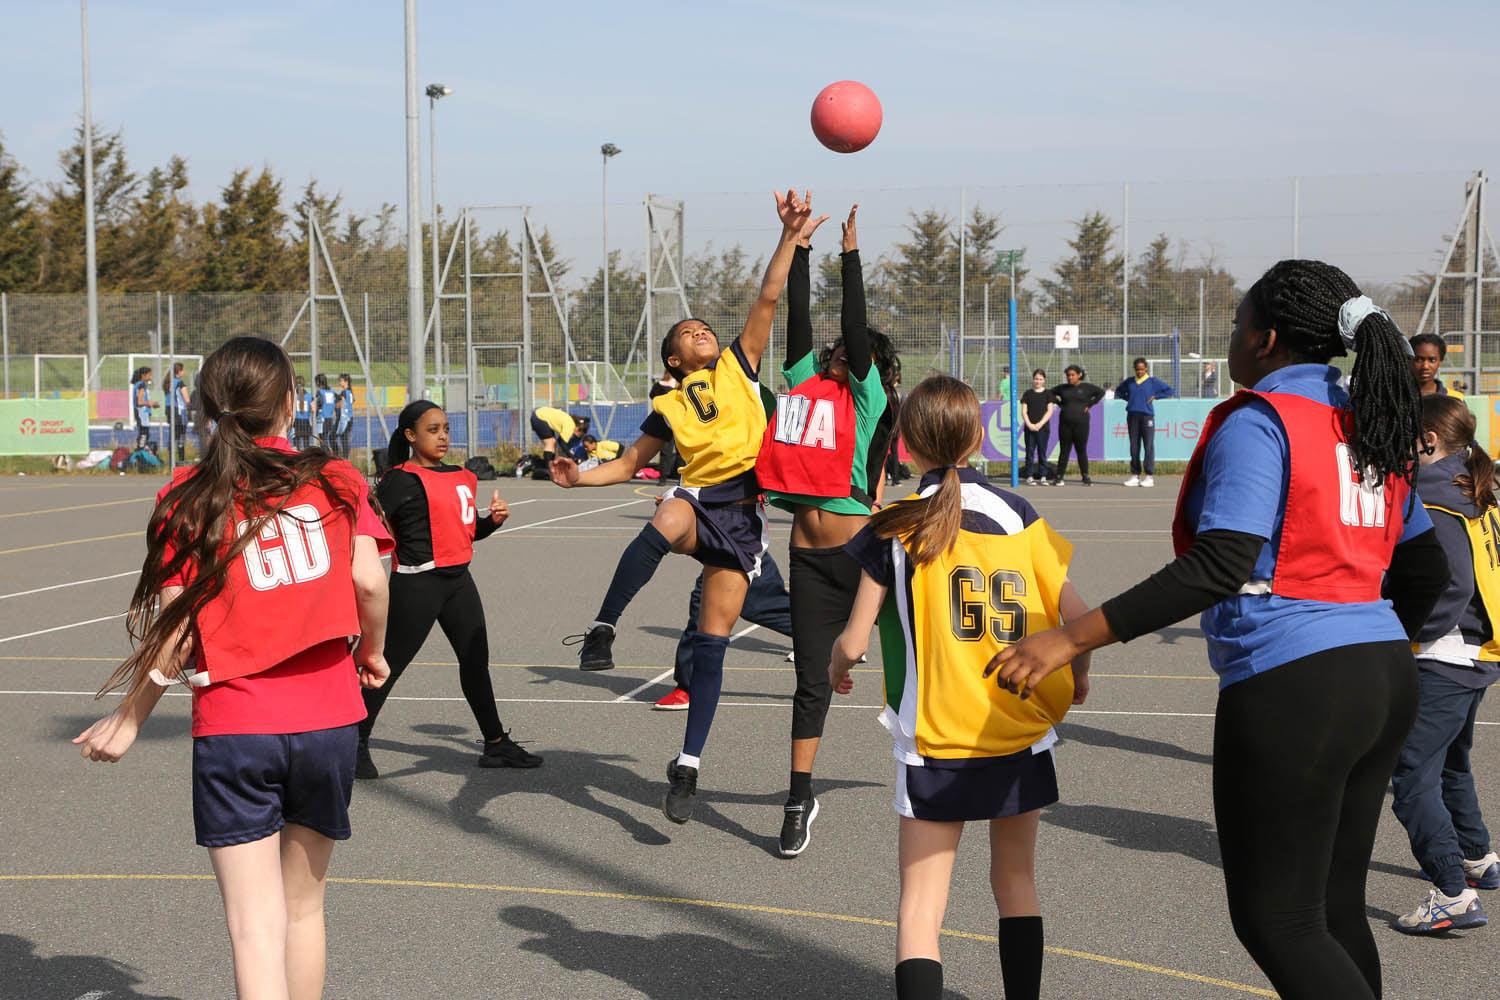 Young female basketball players practicing their skills on the court together.